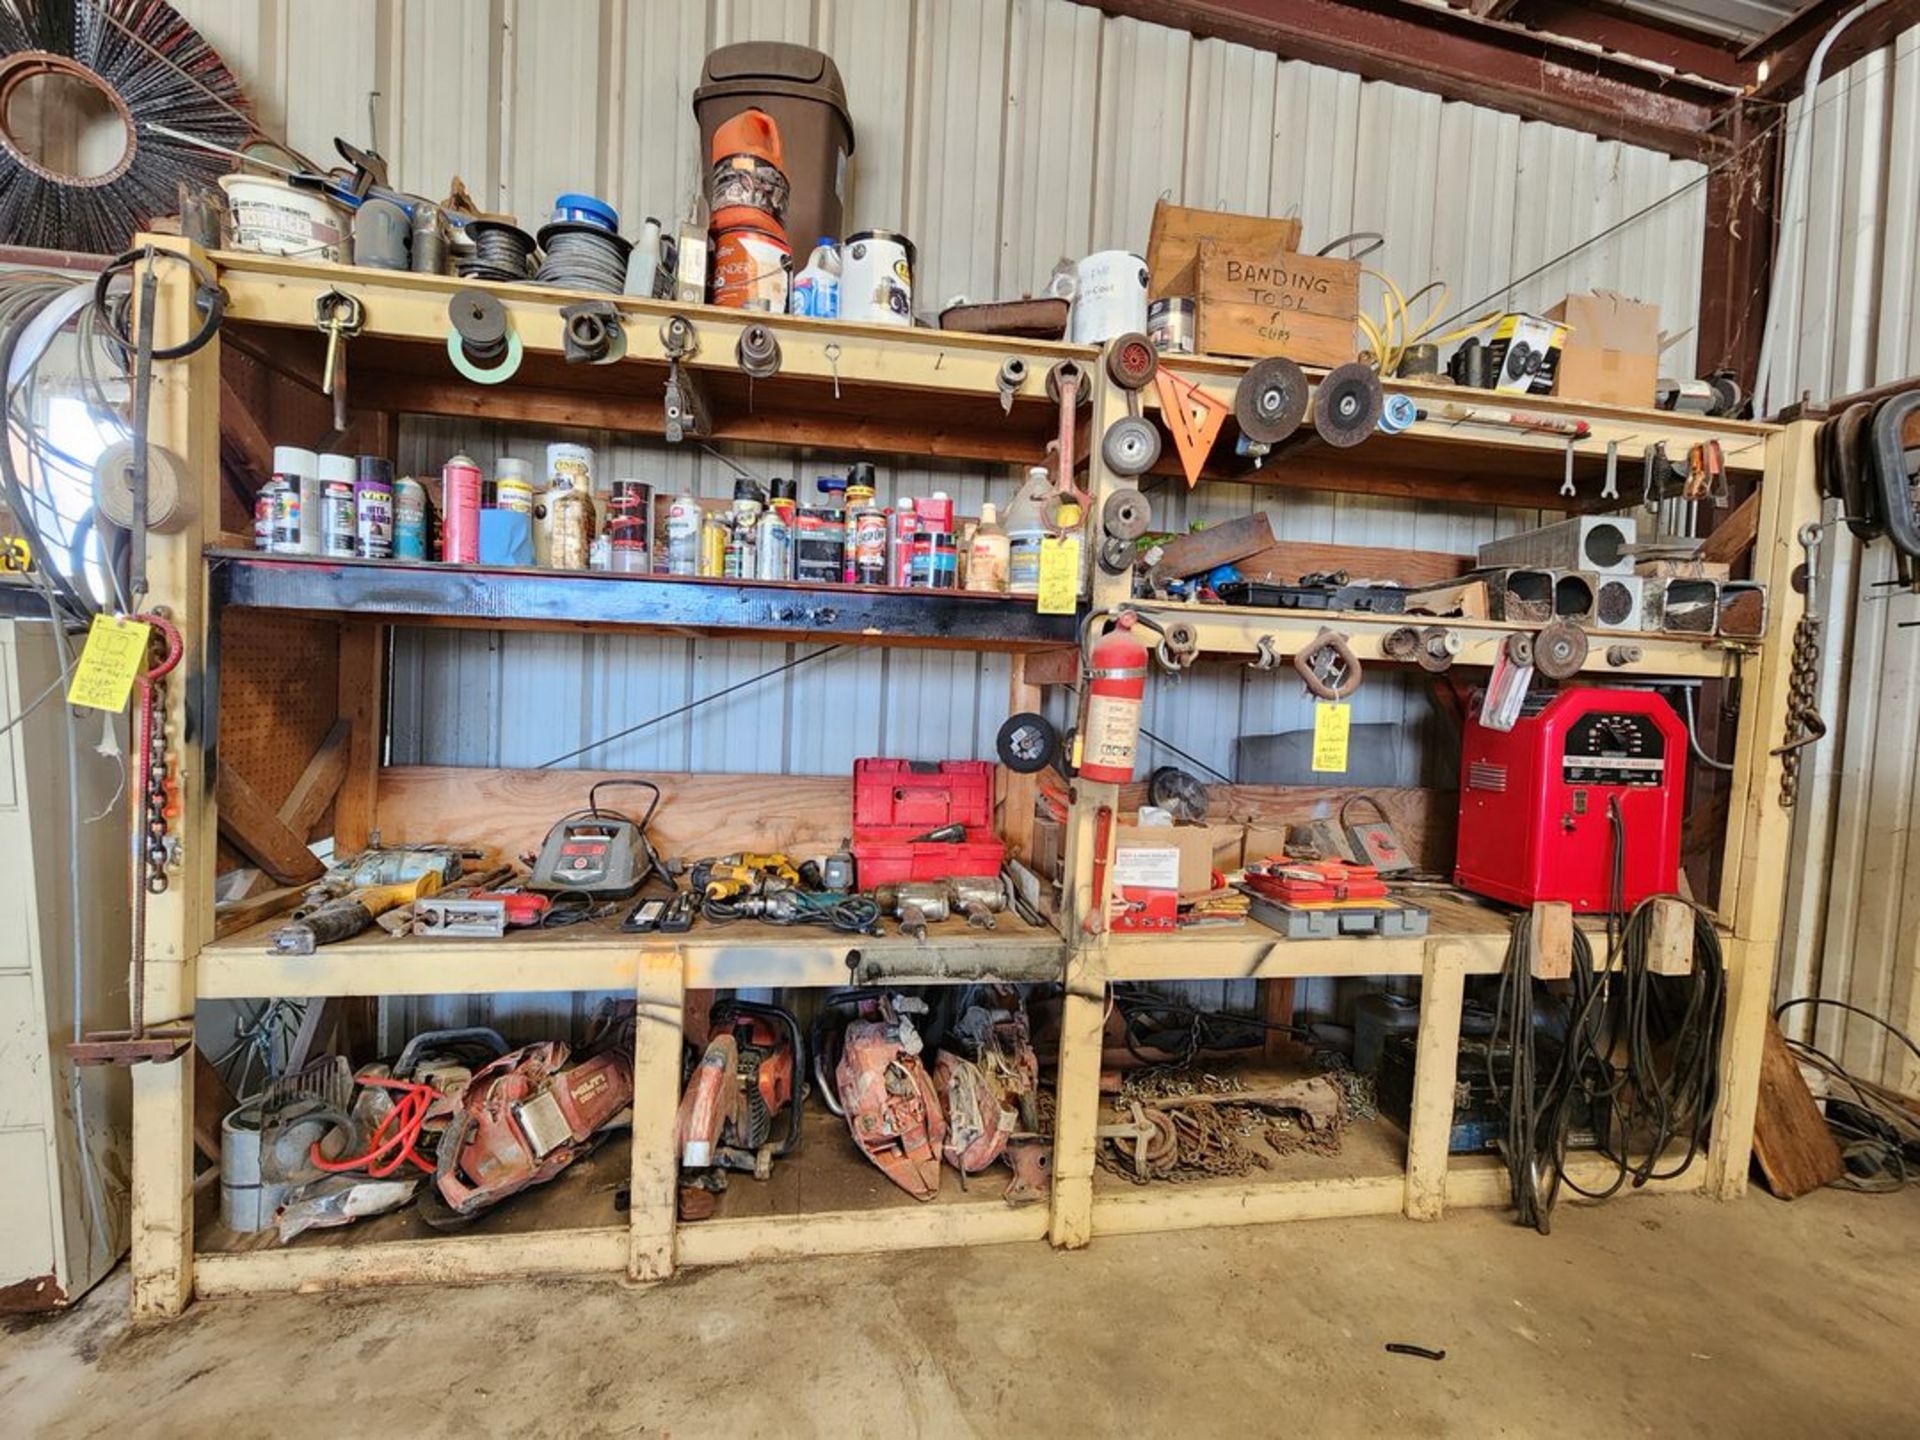 Contents Of Rack To Include But Not Limited To: (Welder Excluded) Assorted Power Tools; Drills;